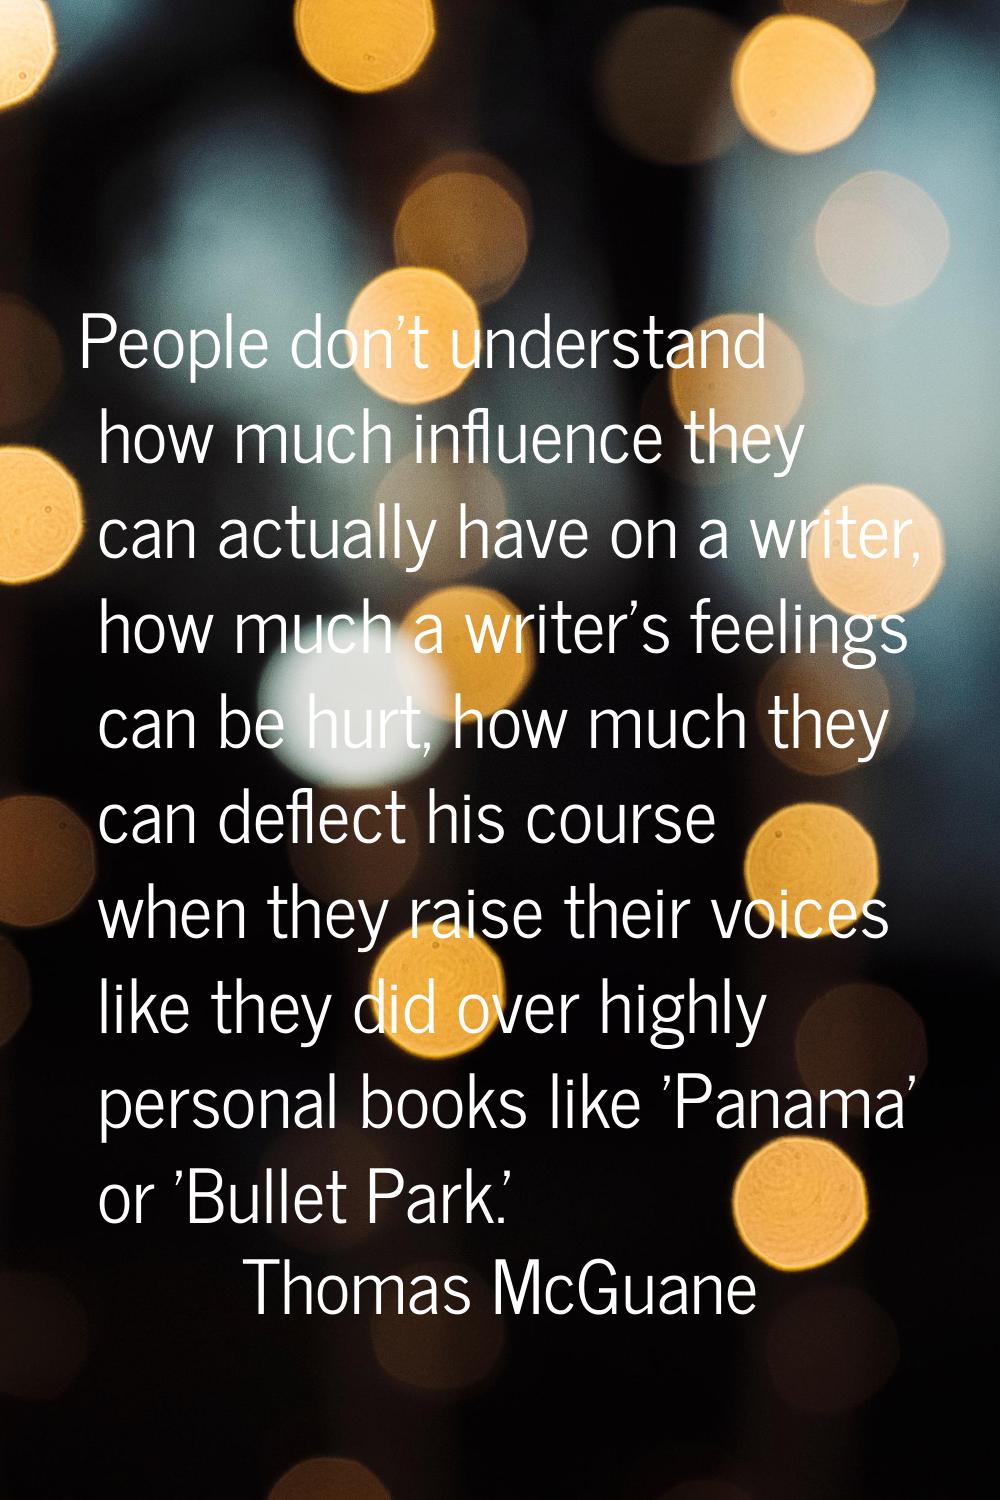 People don't understand how much influence they can actually have on a writer, how much a writer's 